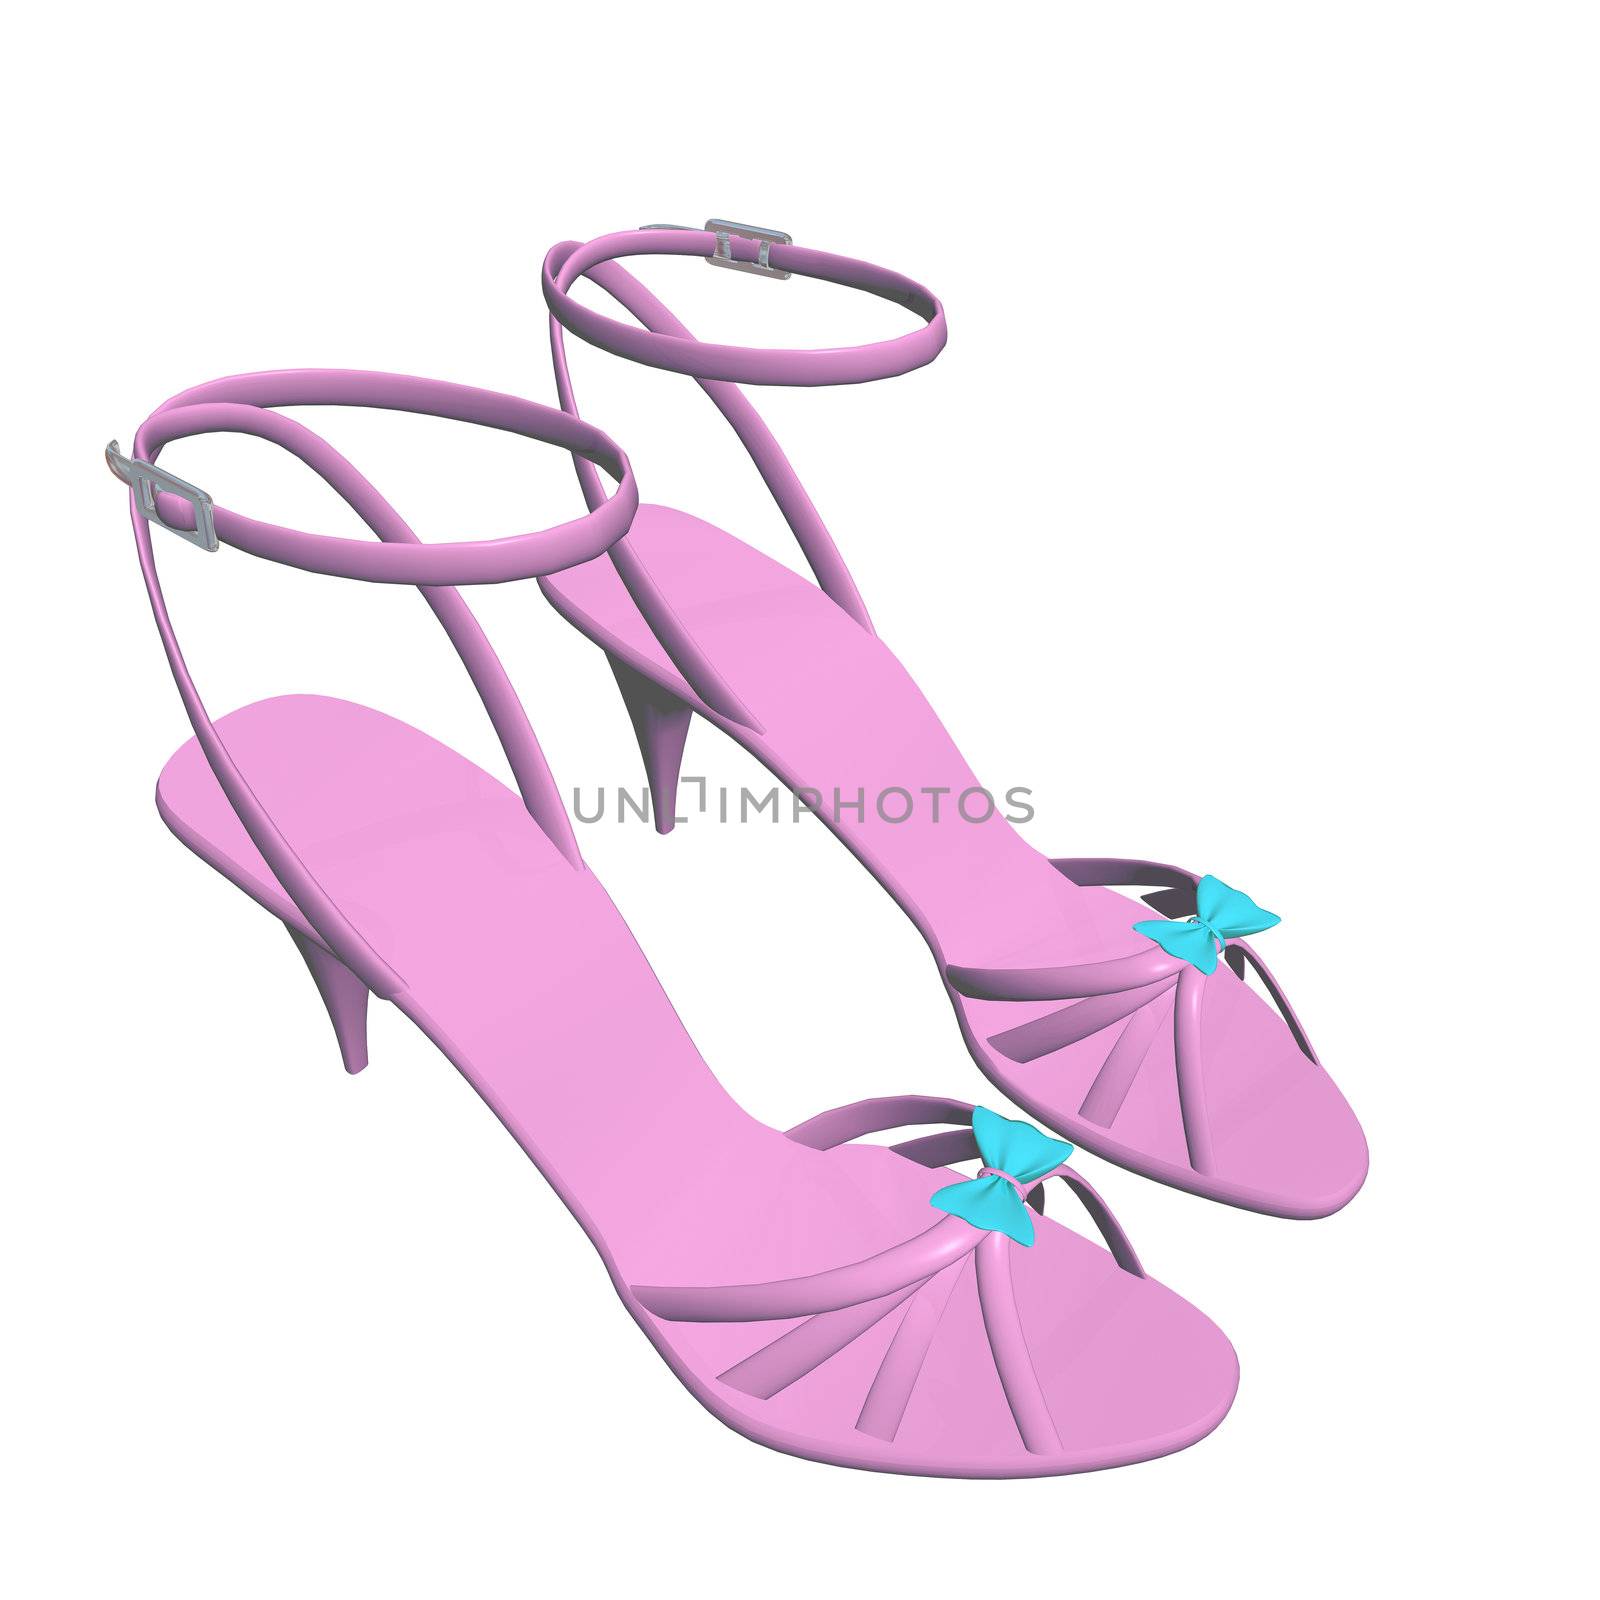 Pink stilleto heels or high heels shoes with ankle strap and blu by Morphart